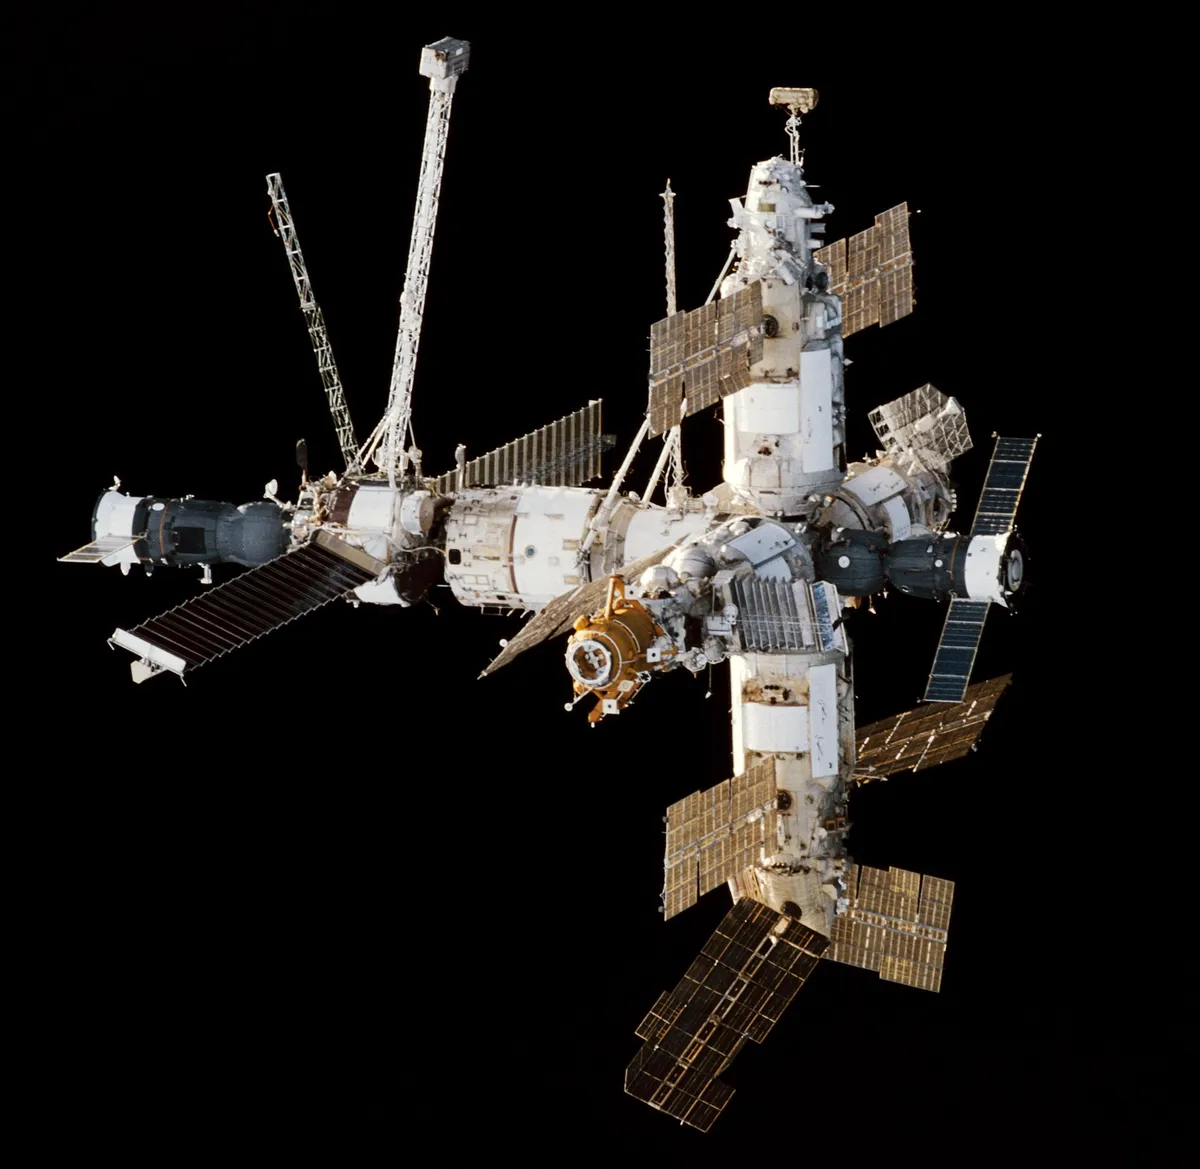 The Mir Space Station as seen from Space Shuttle Endeavour during STS-89. Credit: NASA